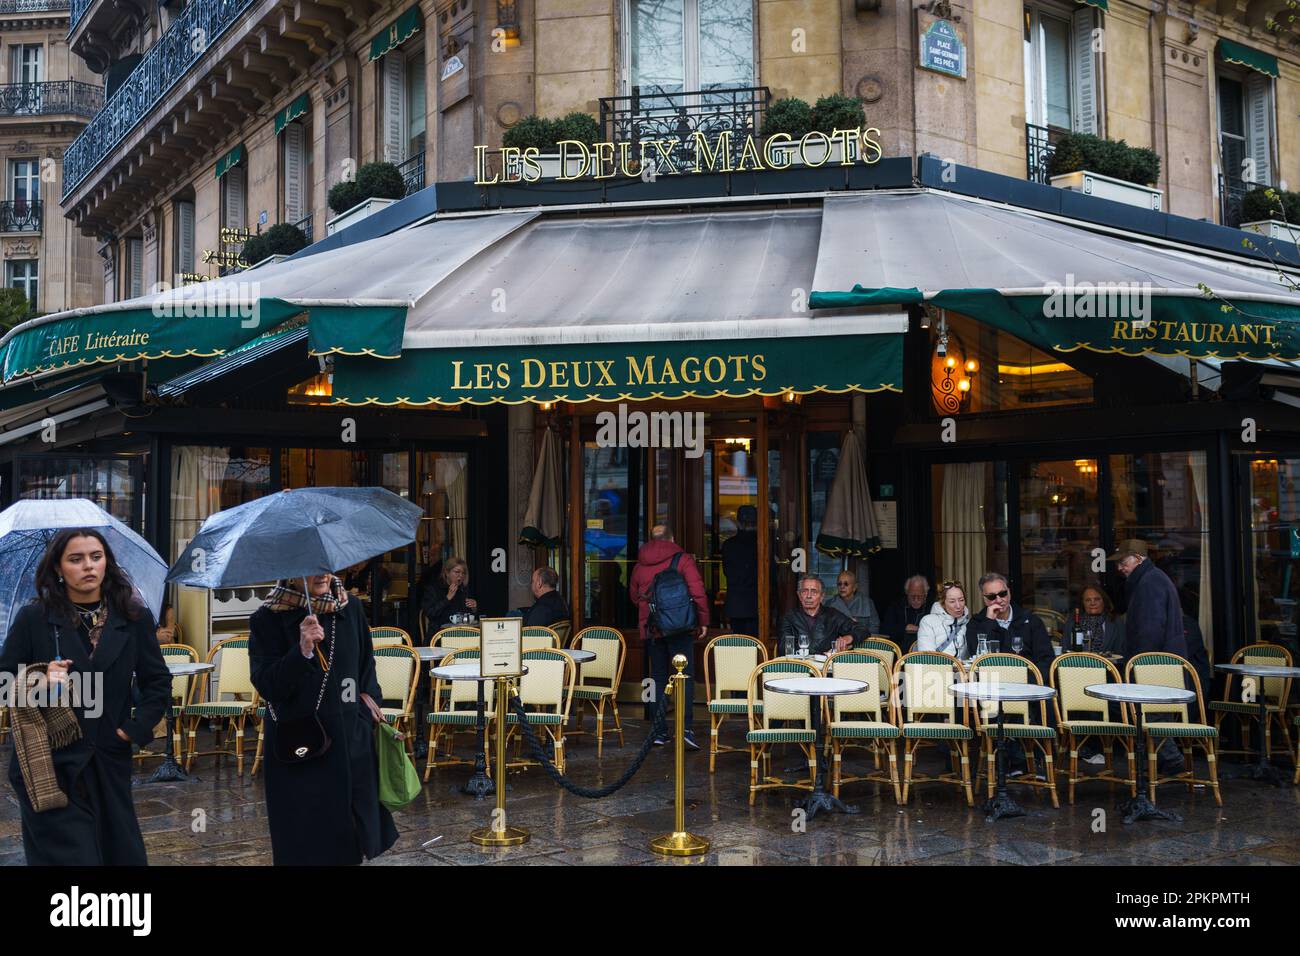 Les Deux Magots, the famous cafe and restaurant in Paris, France on a rainy day. March 24, 2023. Stock Photo